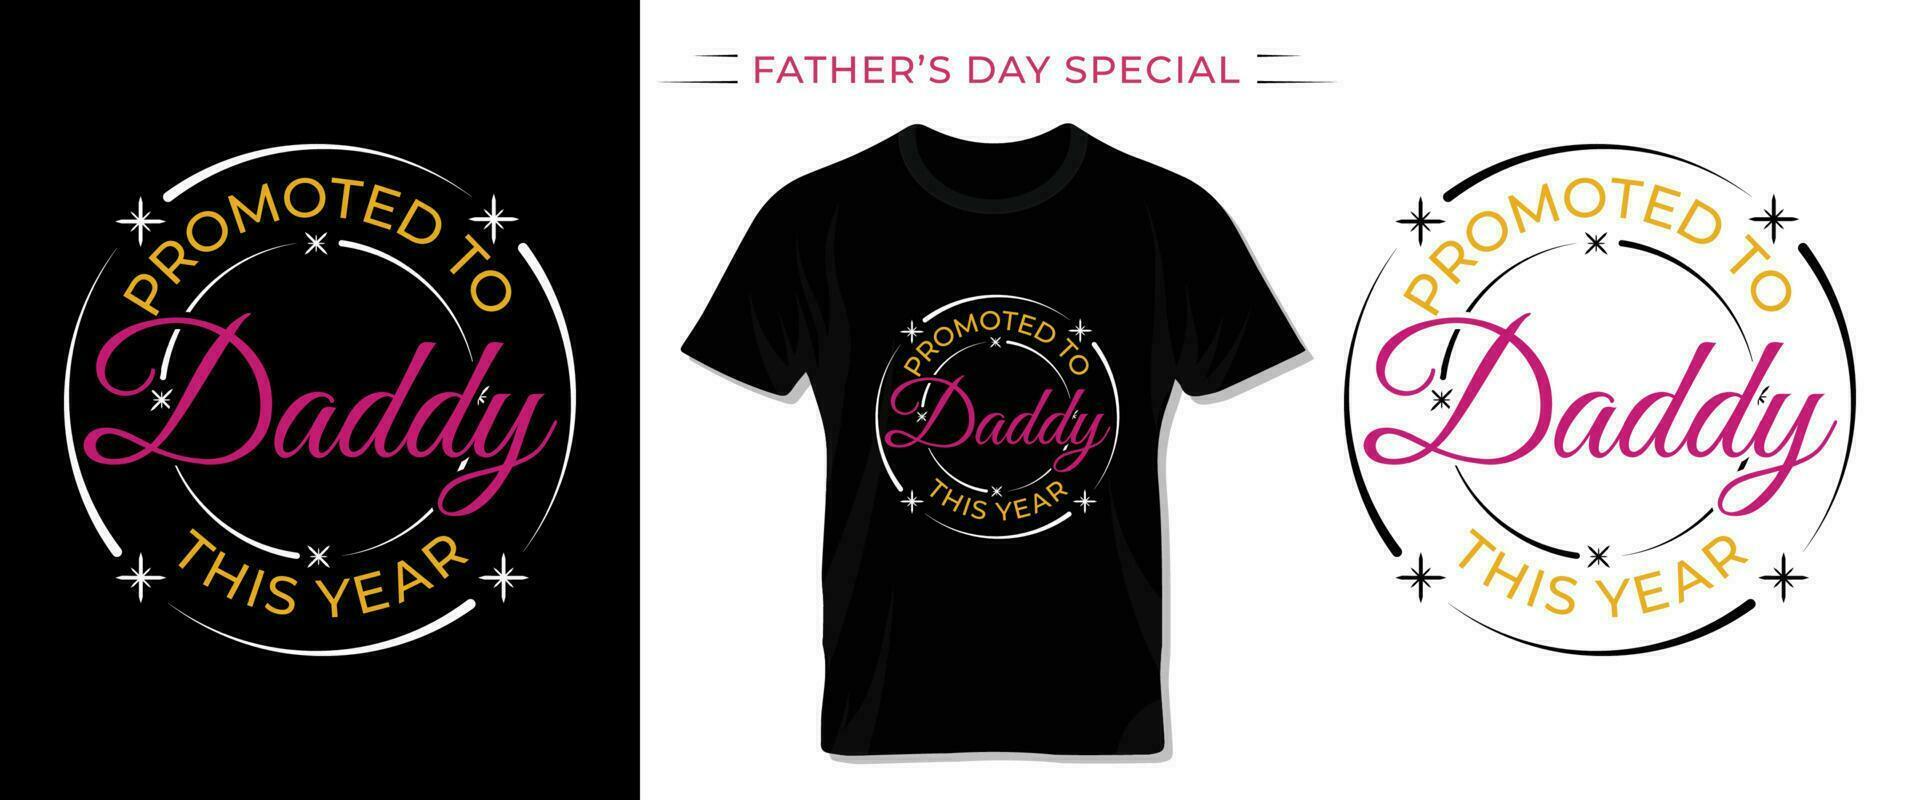 Happy Fathers Day T shirt Dasign. vector